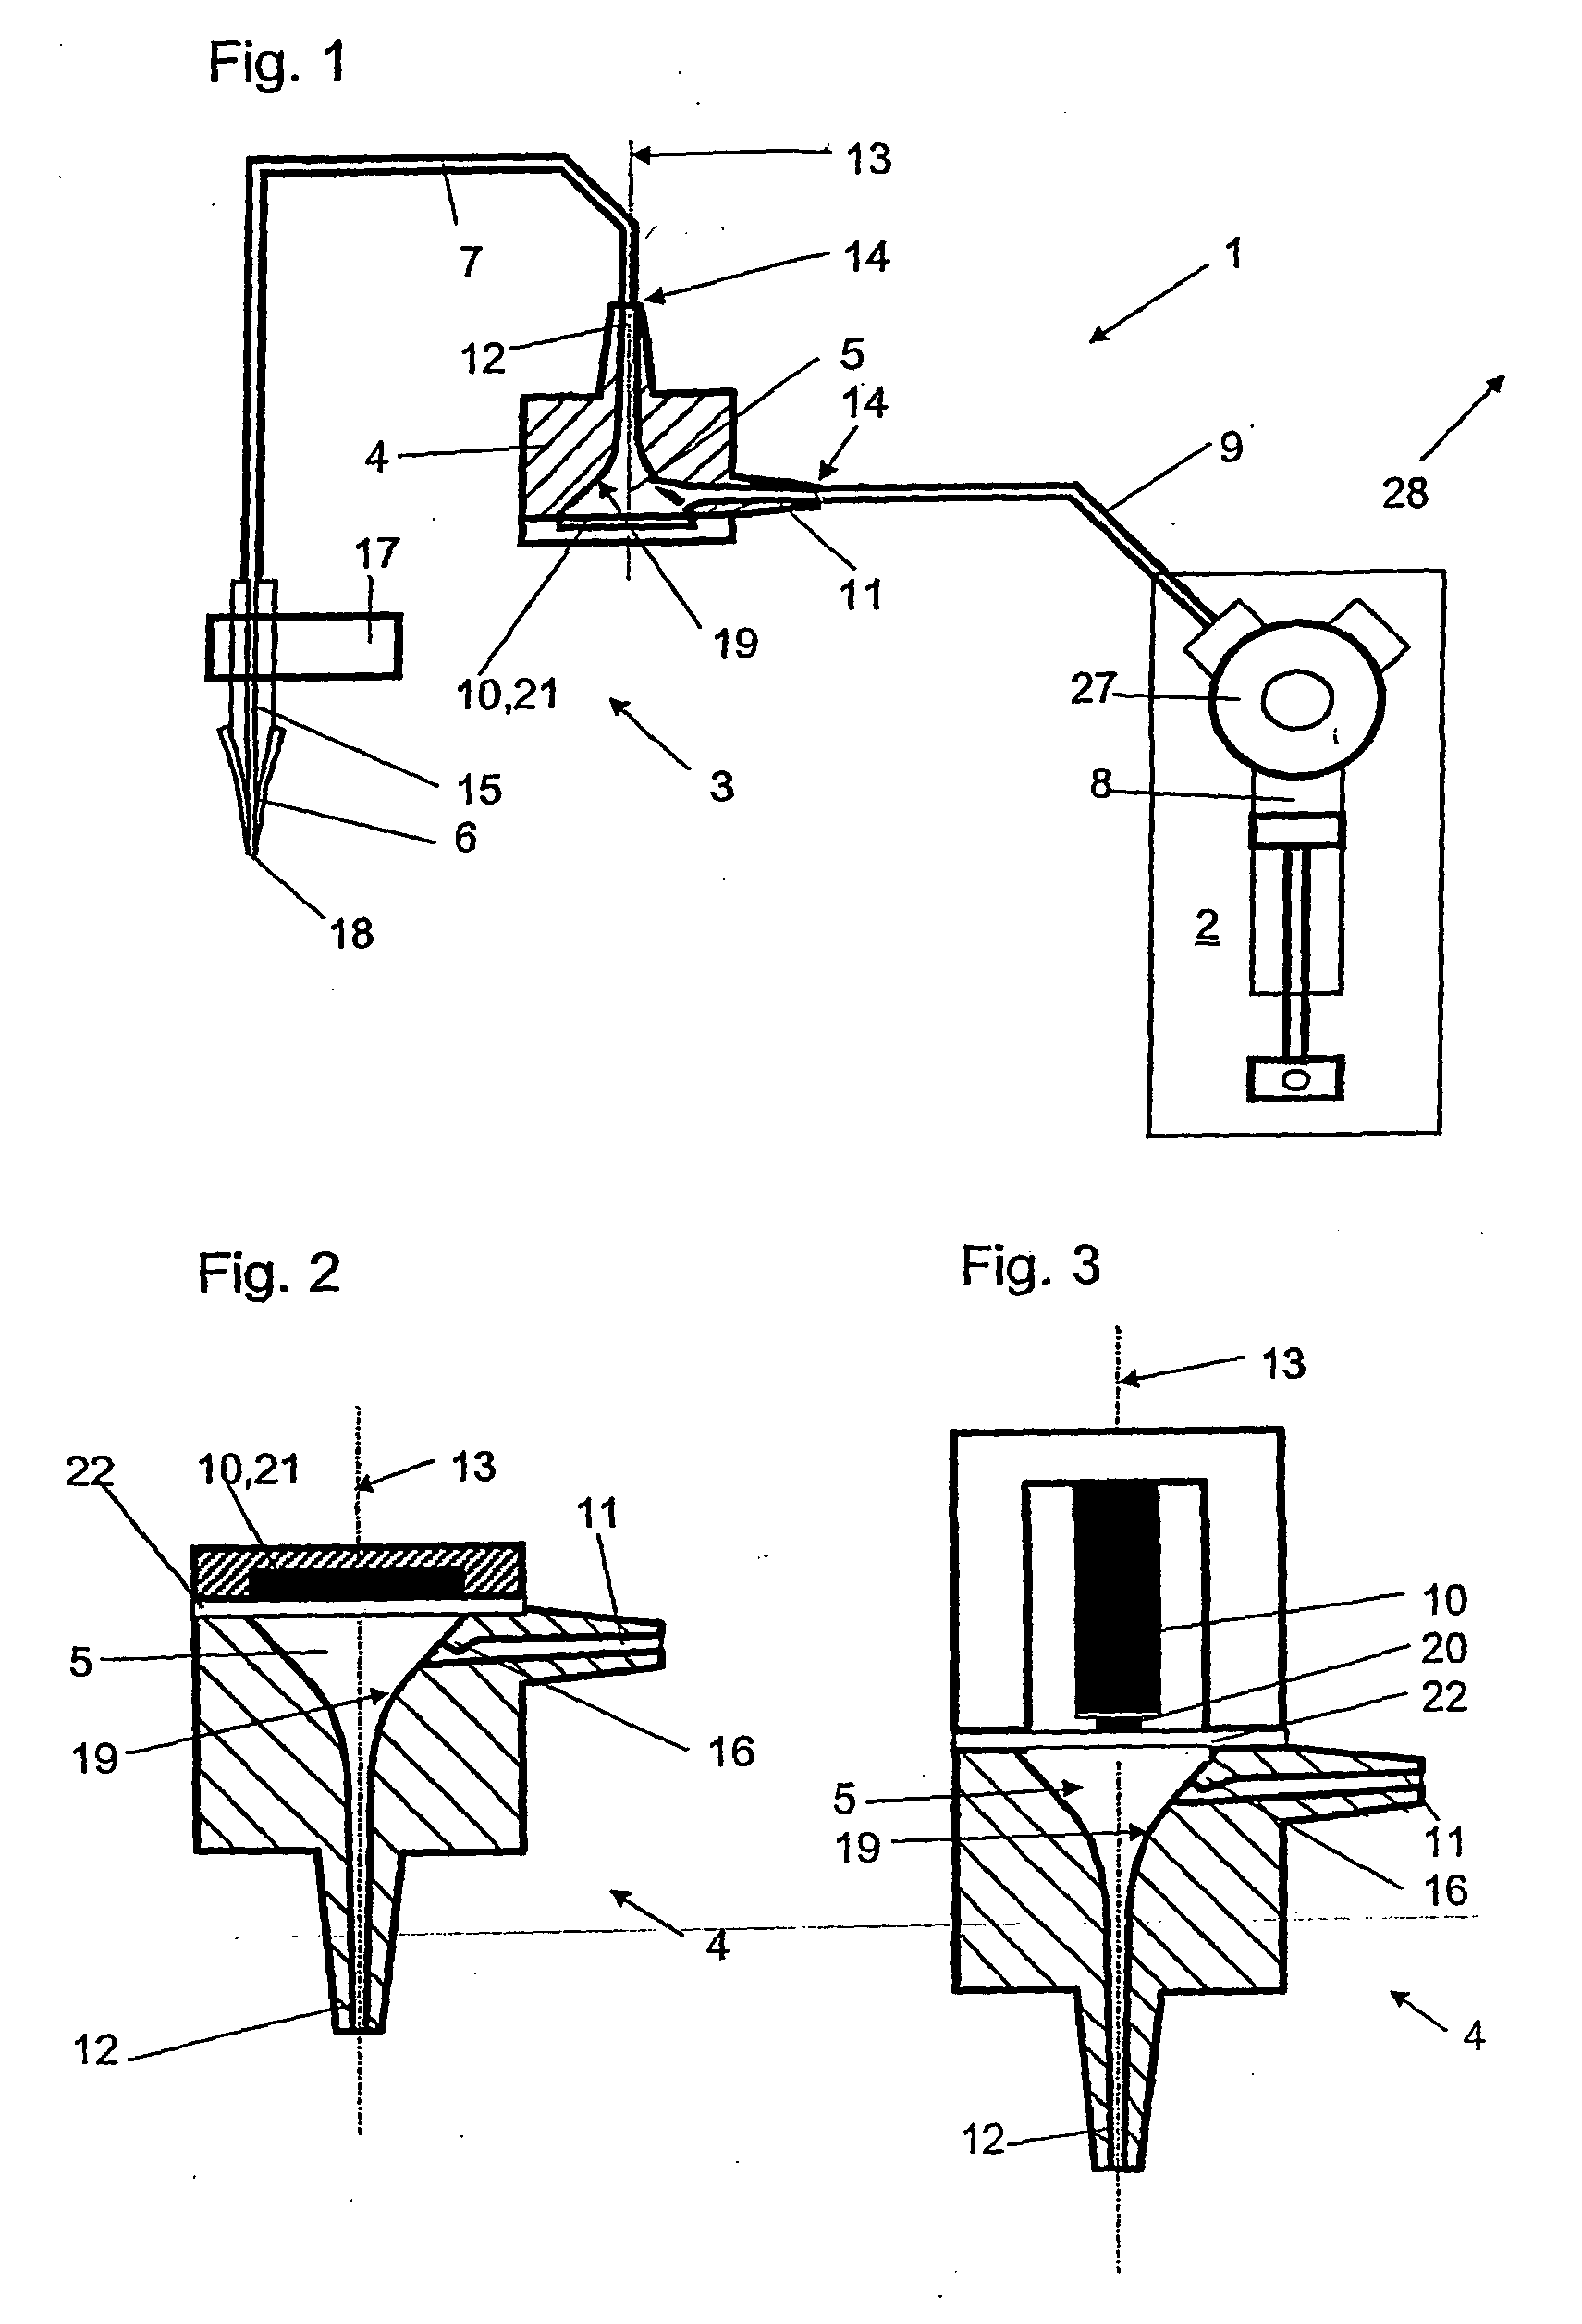 Device and system for dispensing or aspirating/dispensing liquid samples